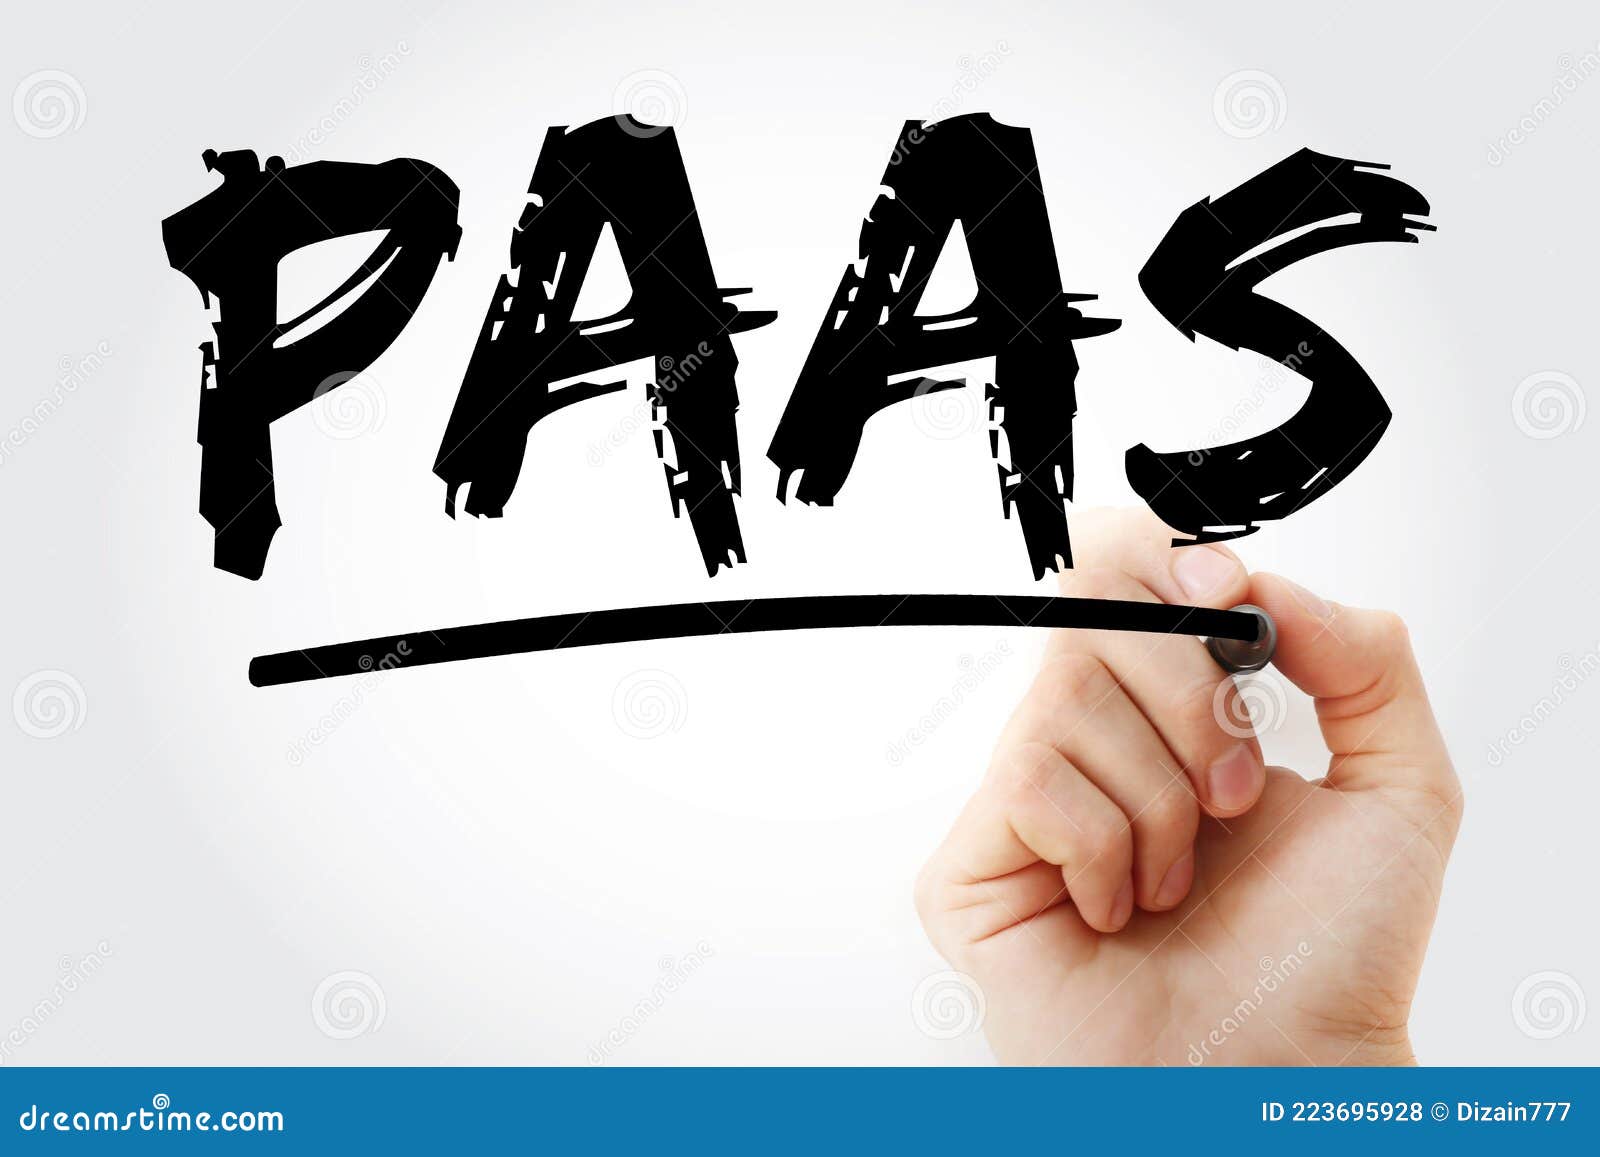 paas - platform as a service acronym with marker, technology concept background